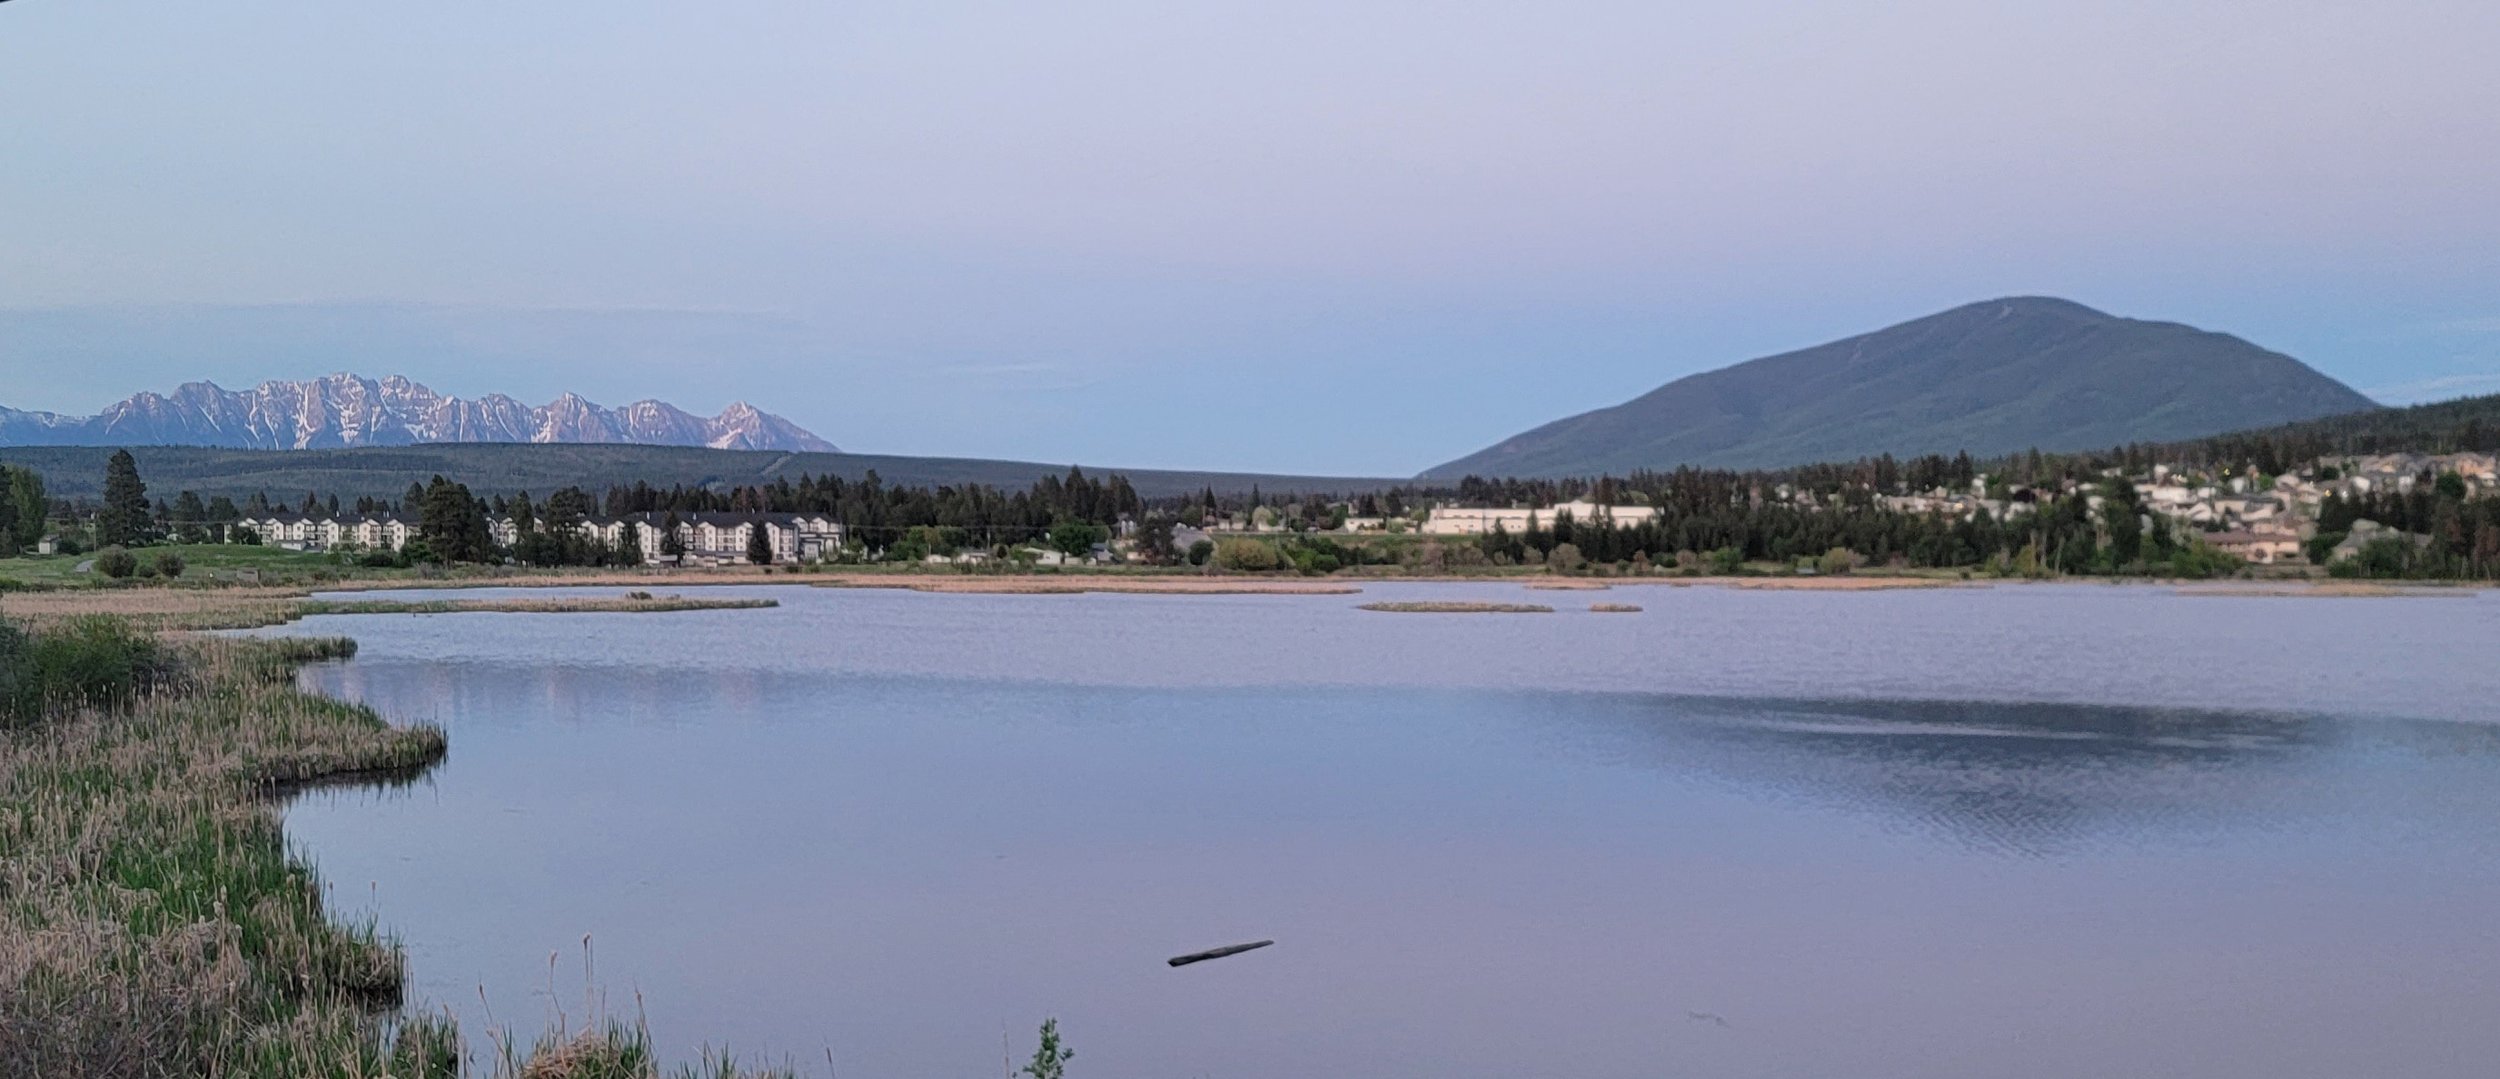 Evening in Crankbrook ( about 1 hour away ). This is Elizabeth Lake right as you enter the town. You can see the Glacier Rockies in the distance already.